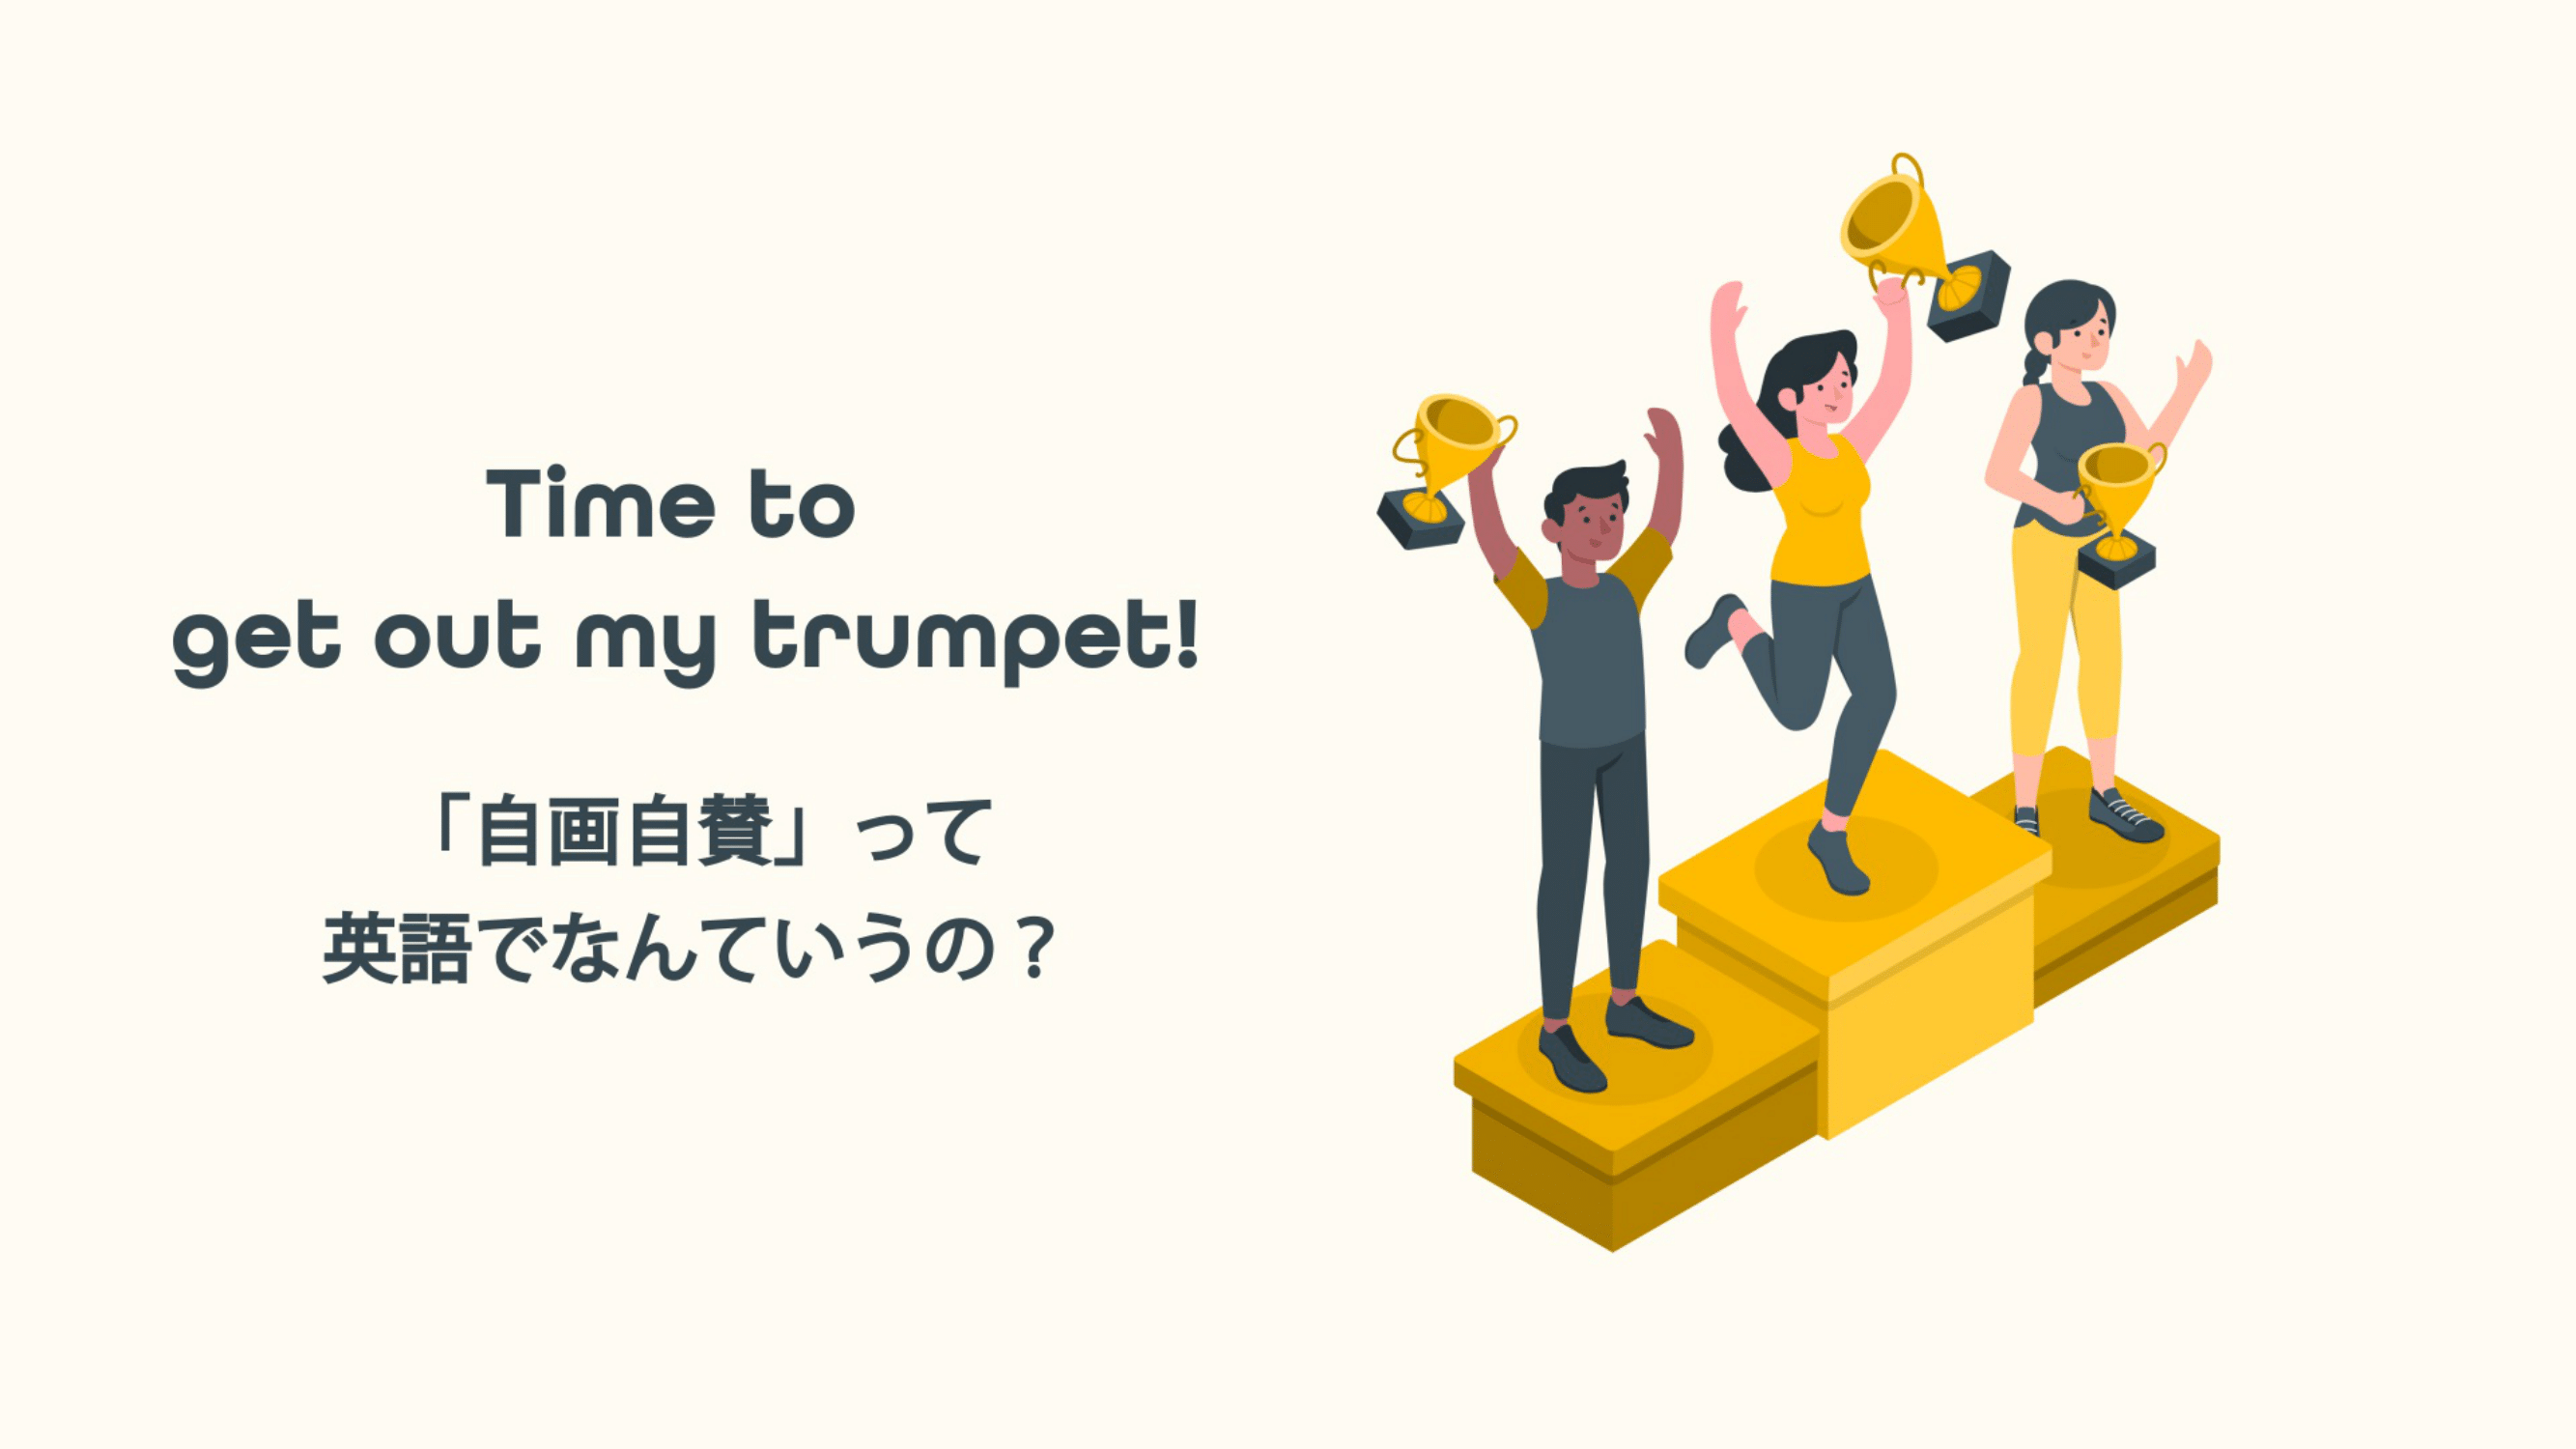 Featured image for “Blow my own trumpetの意味 – 「自画自賛」って英語でなんていうの？”